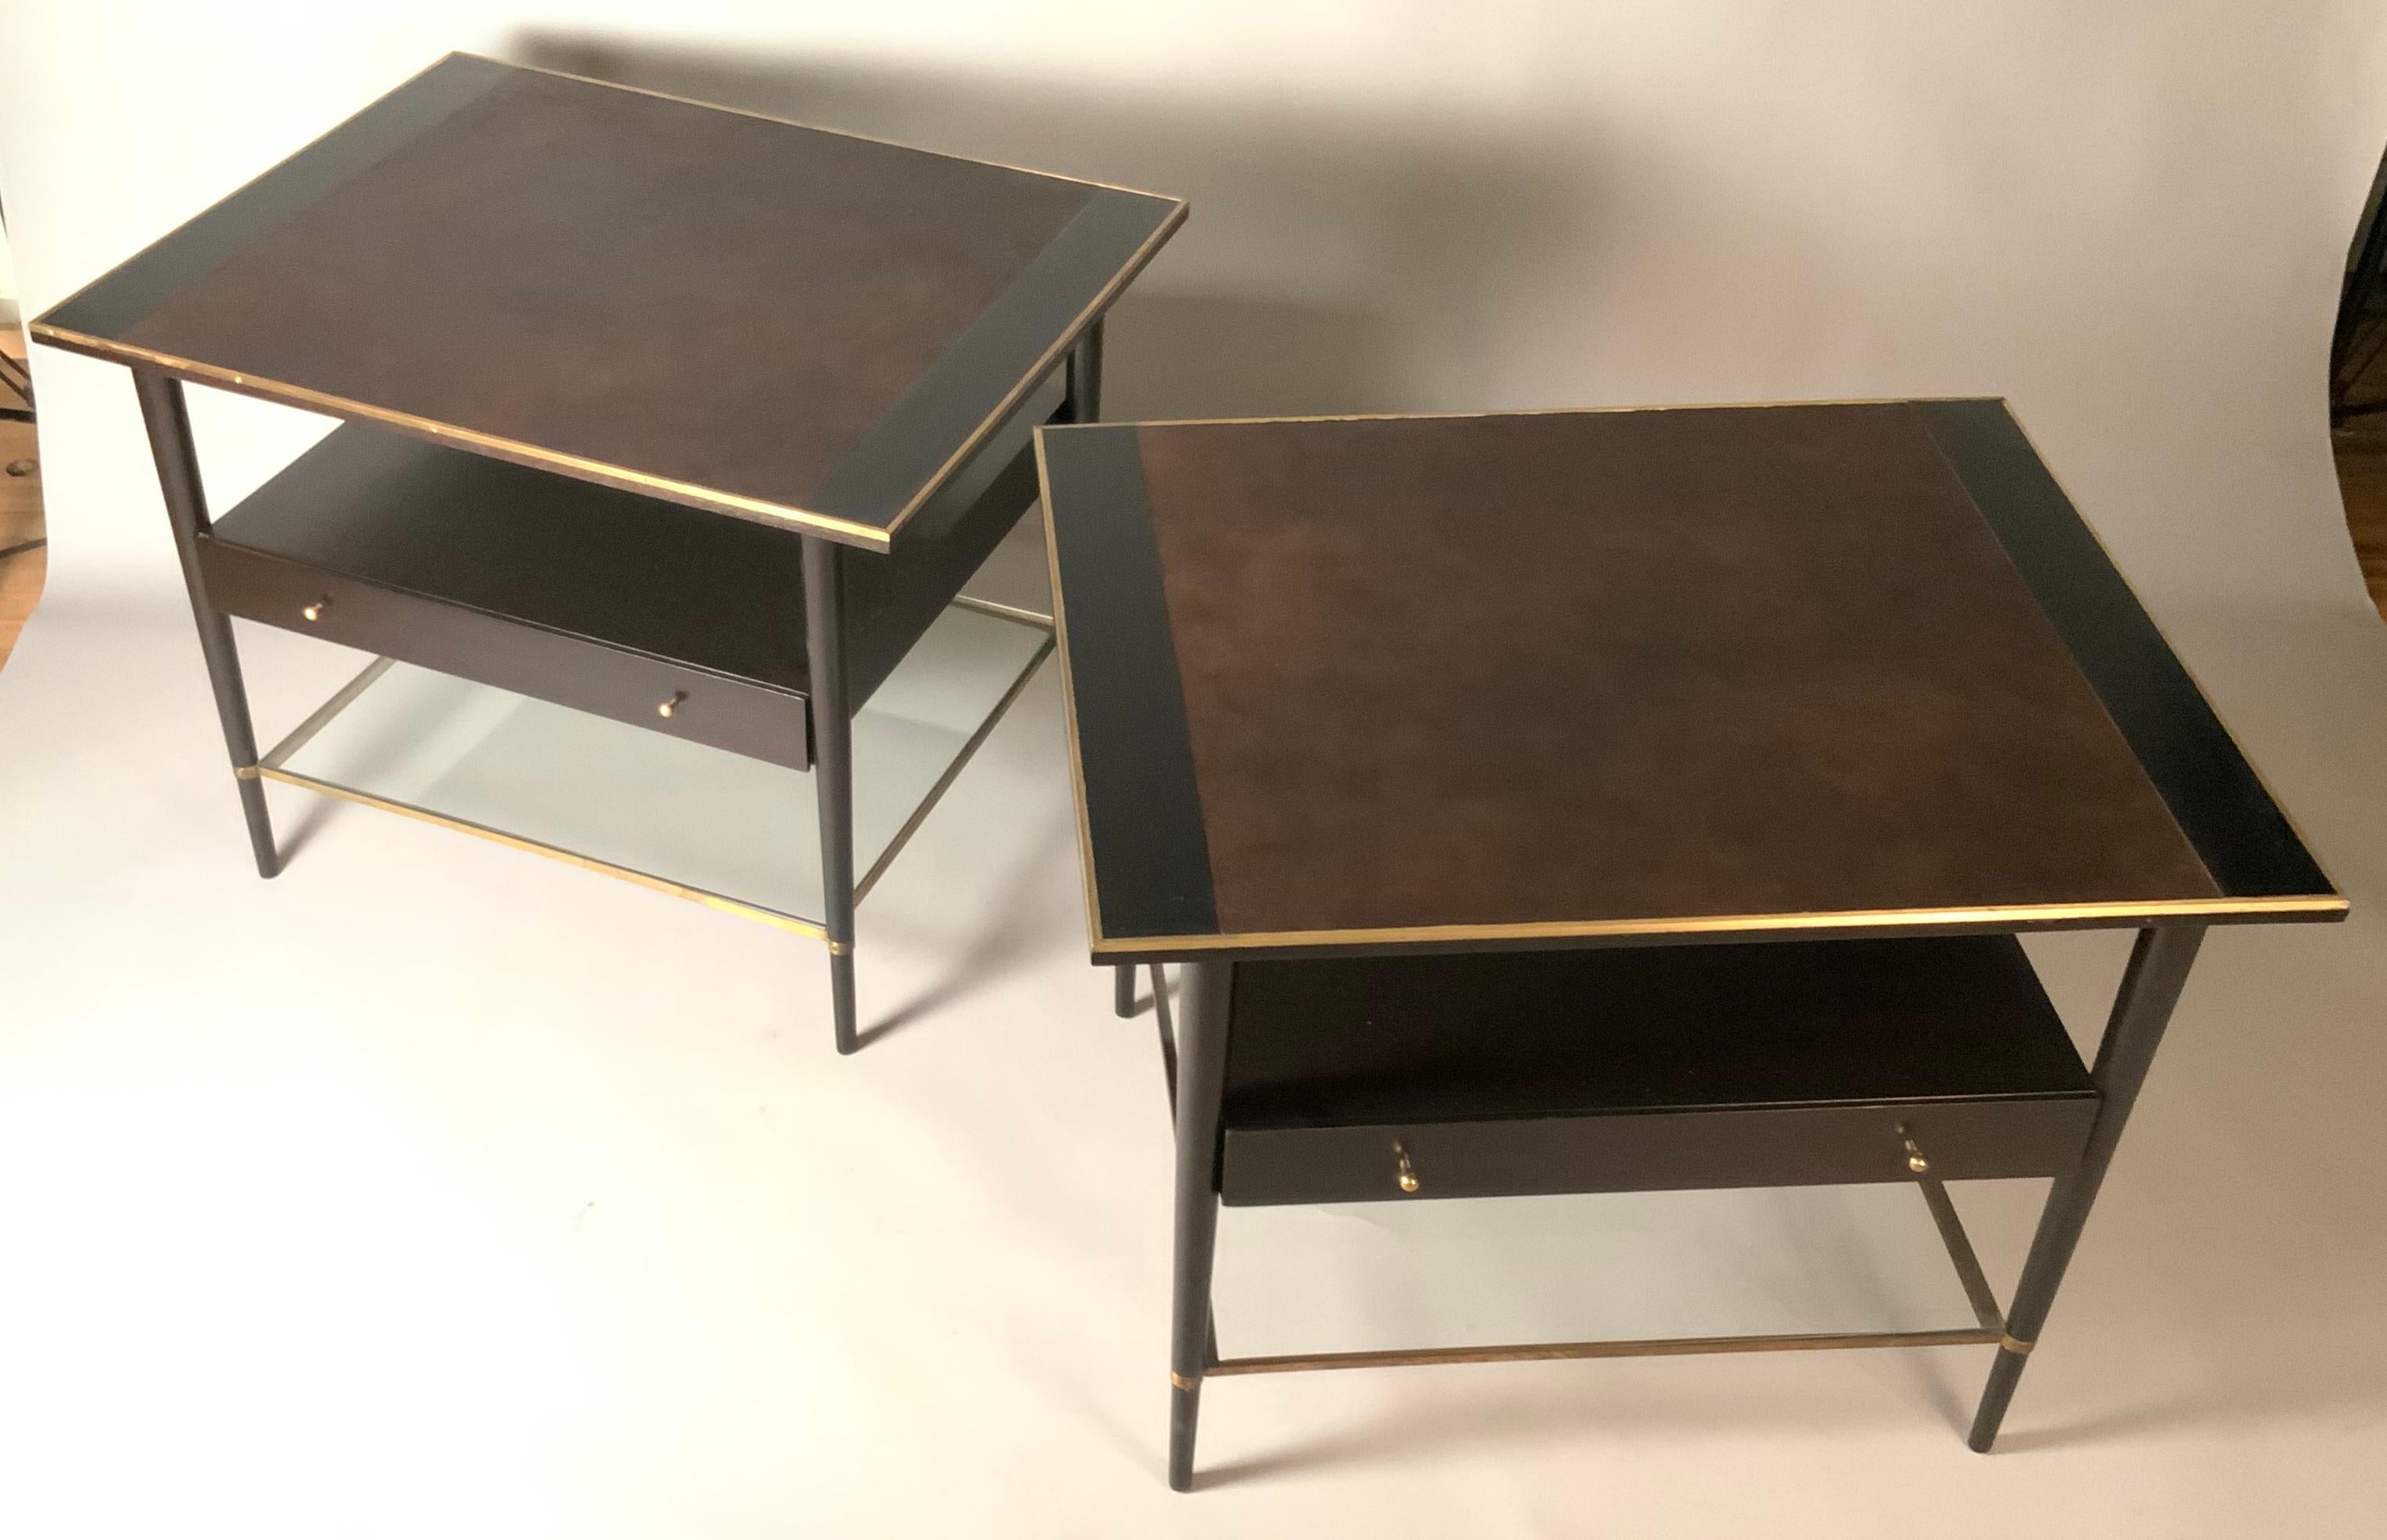 A pair of very handsome 1950's nightstands by Paul McCobb for Calvin. Beautiful design and scale, with mahogany cases, leather top, brass trim, and a lower glass shelf. Each table has a single drawer as well. beautifully restored with an ebonized